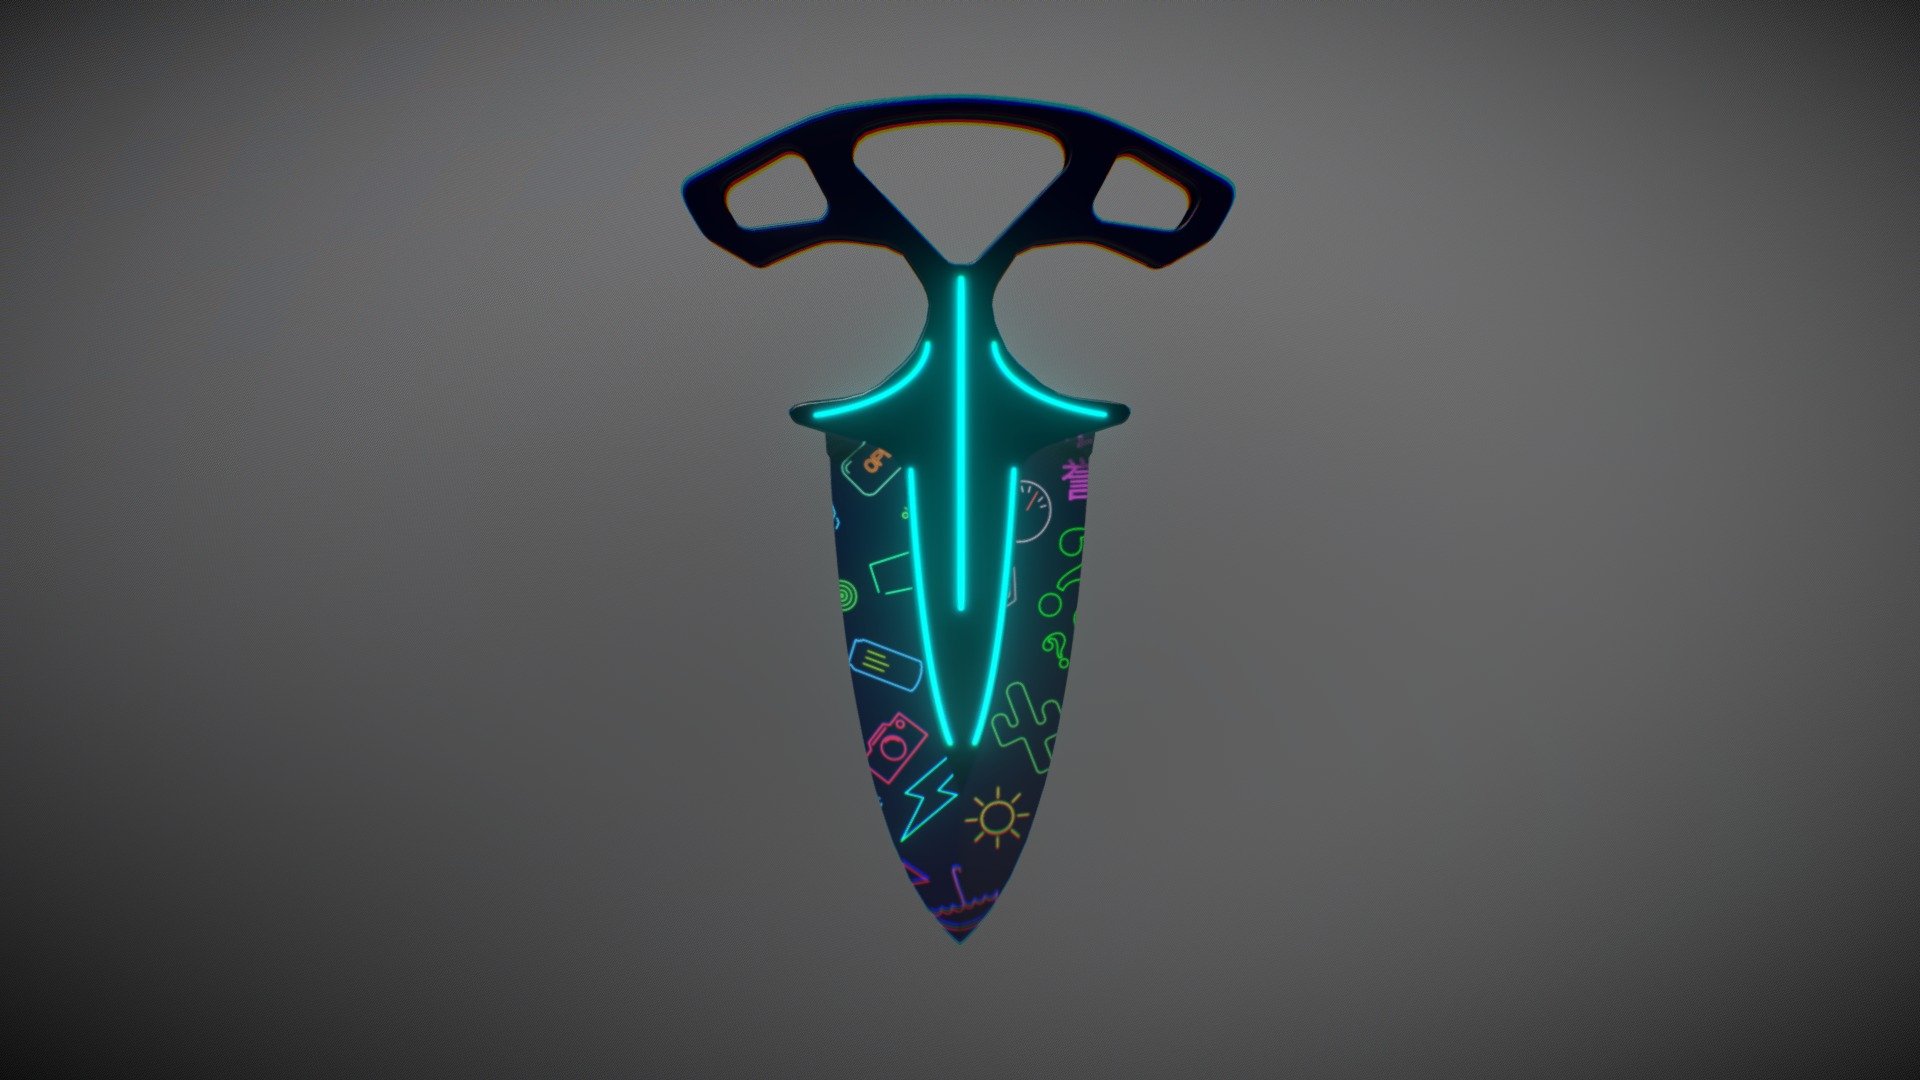 Shadow Daggers | Japanese Neons

Submission for #VGODesign contest by VGO.gg

Made by twitter.com/vncidesign - Shadow Daggers | Japanese Neons - 3D model by vnci 3d model